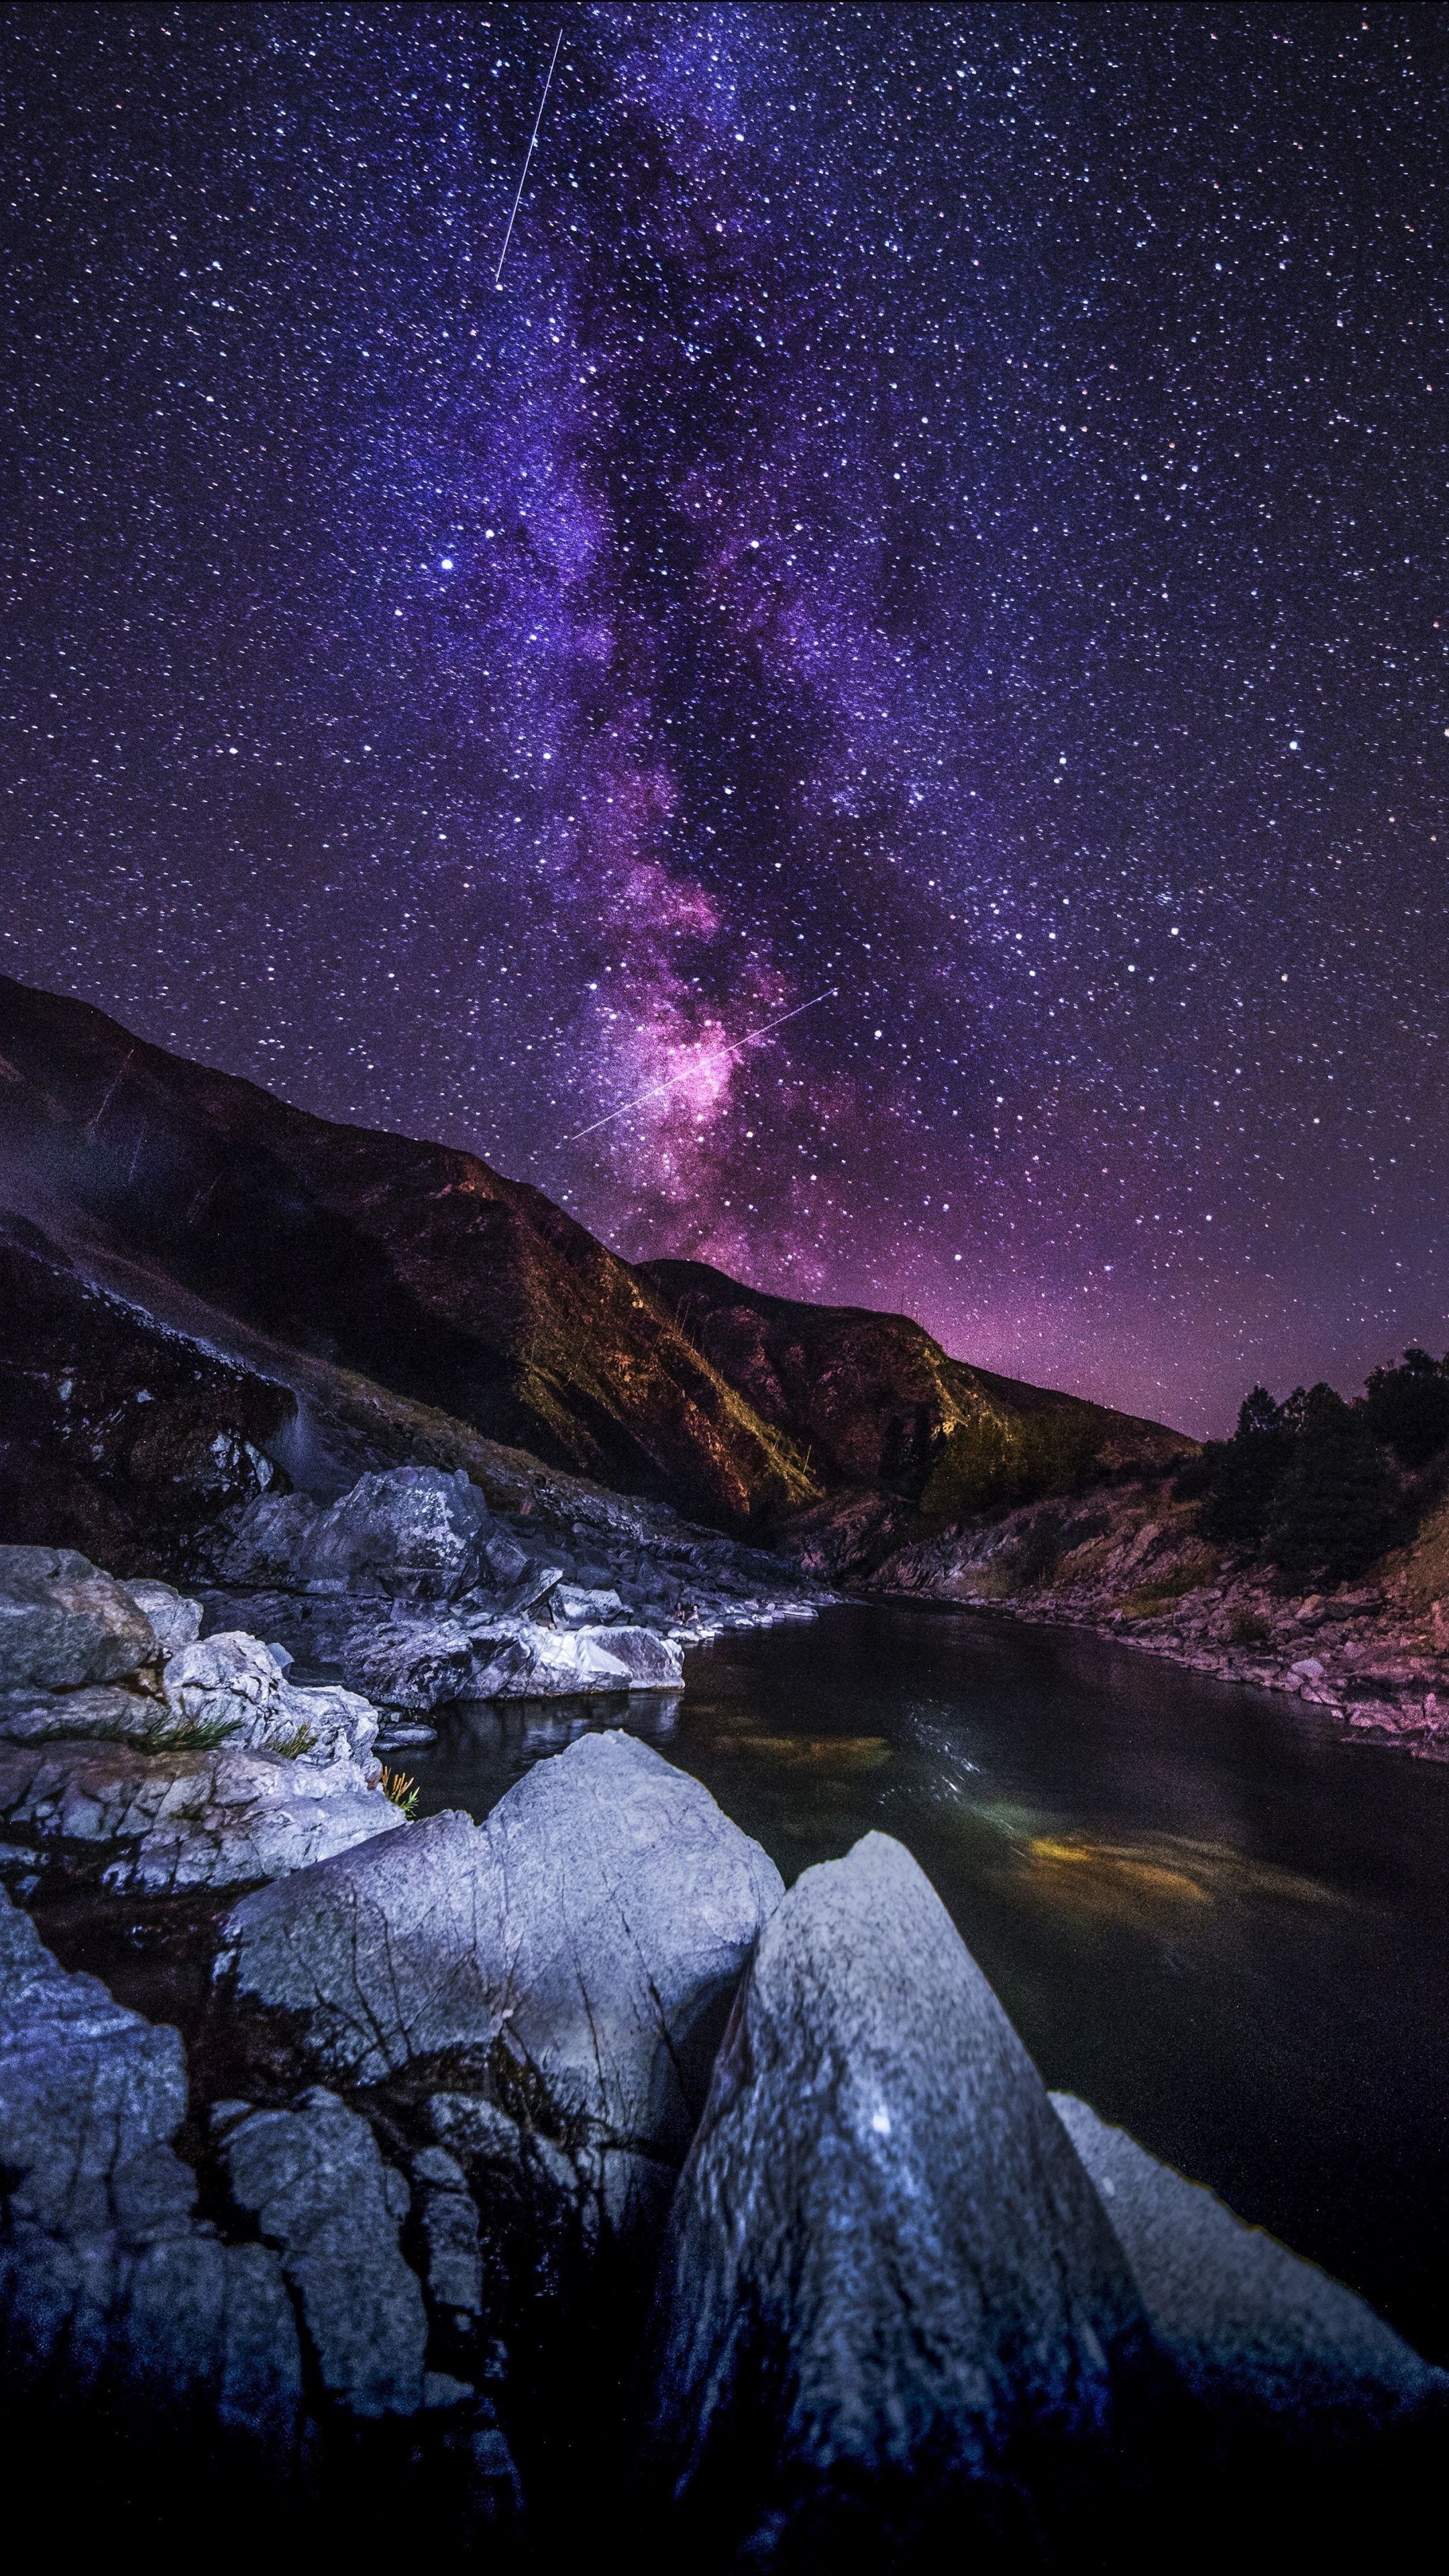 Starry sky, mountains, river, night wallpaper. iPhone wallpaper sky, Night skies, Beautiful night sky